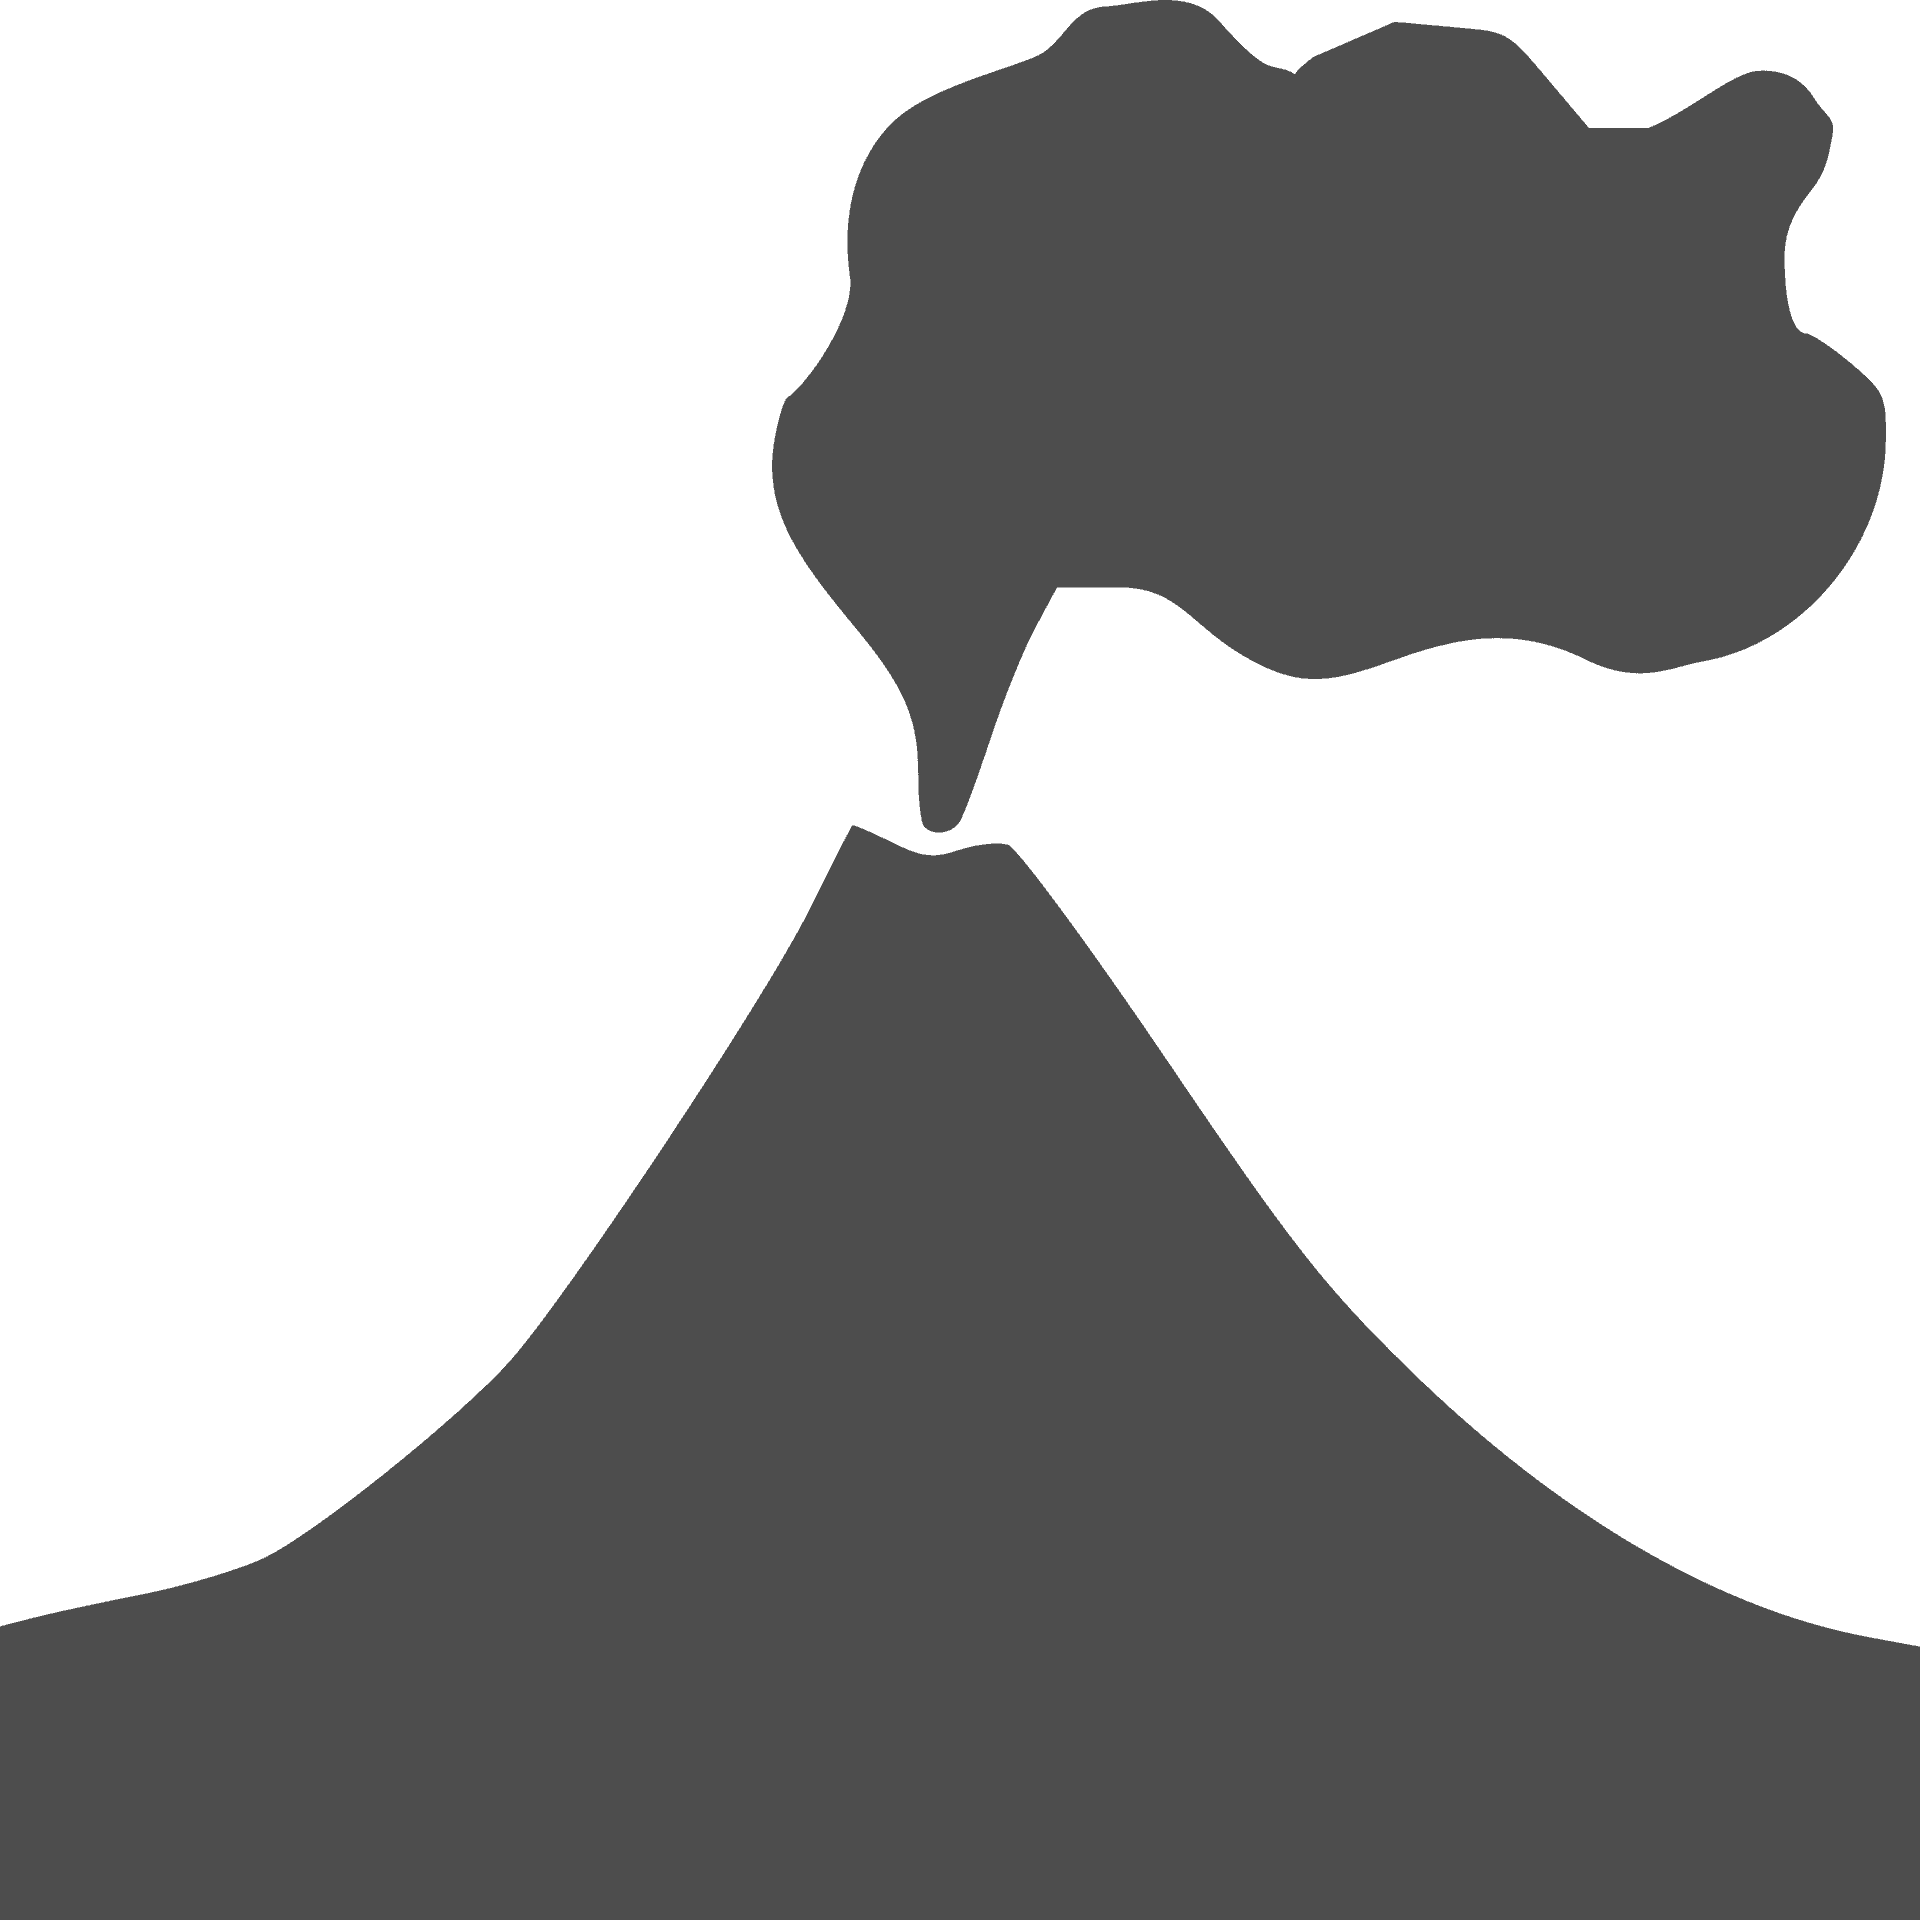 Simplified Volcano Eruption Graphic PNG image